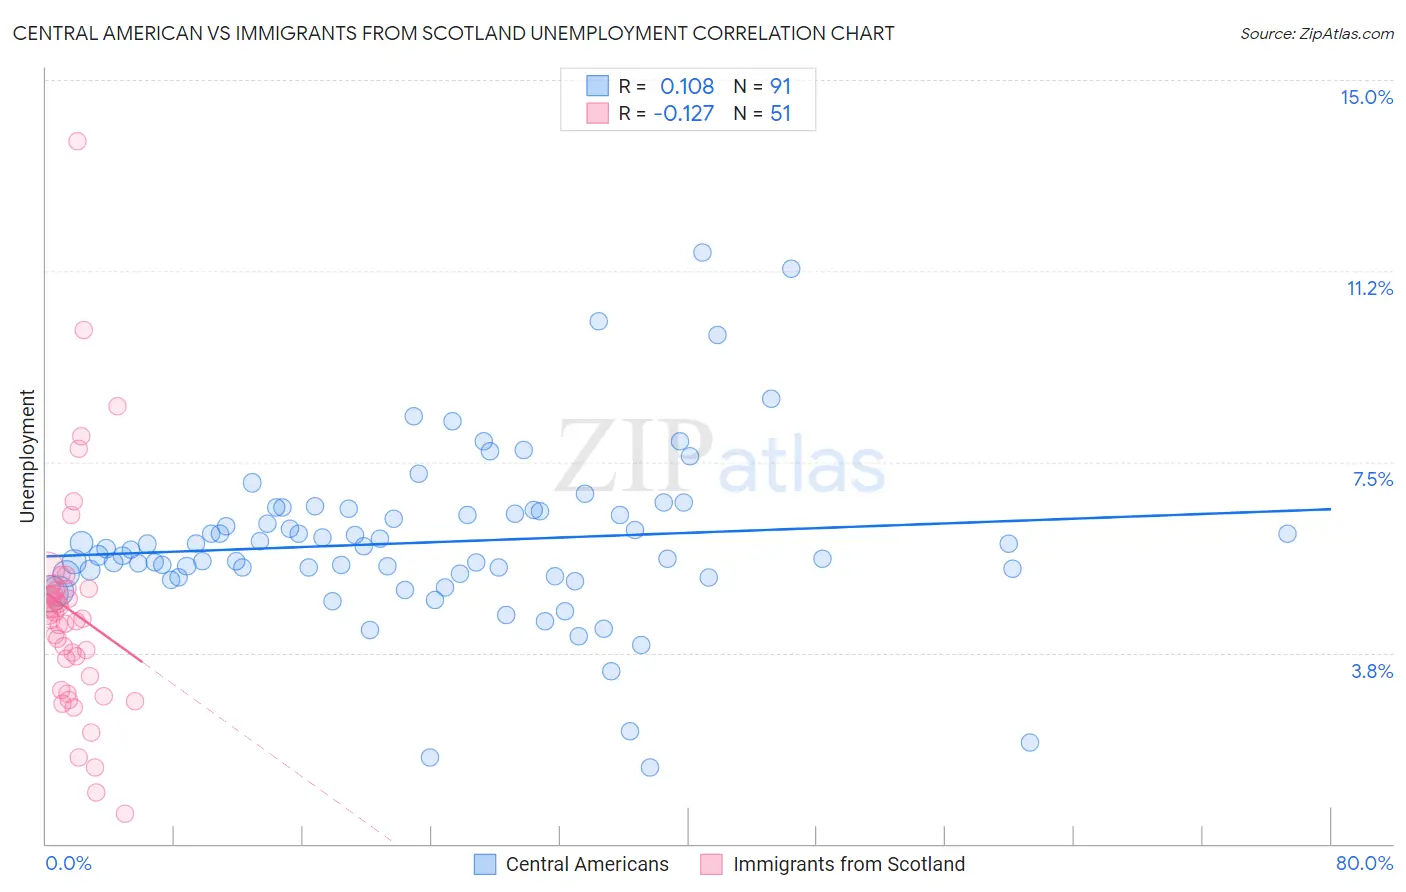 Central American vs Immigrants from Scotland Unemployment